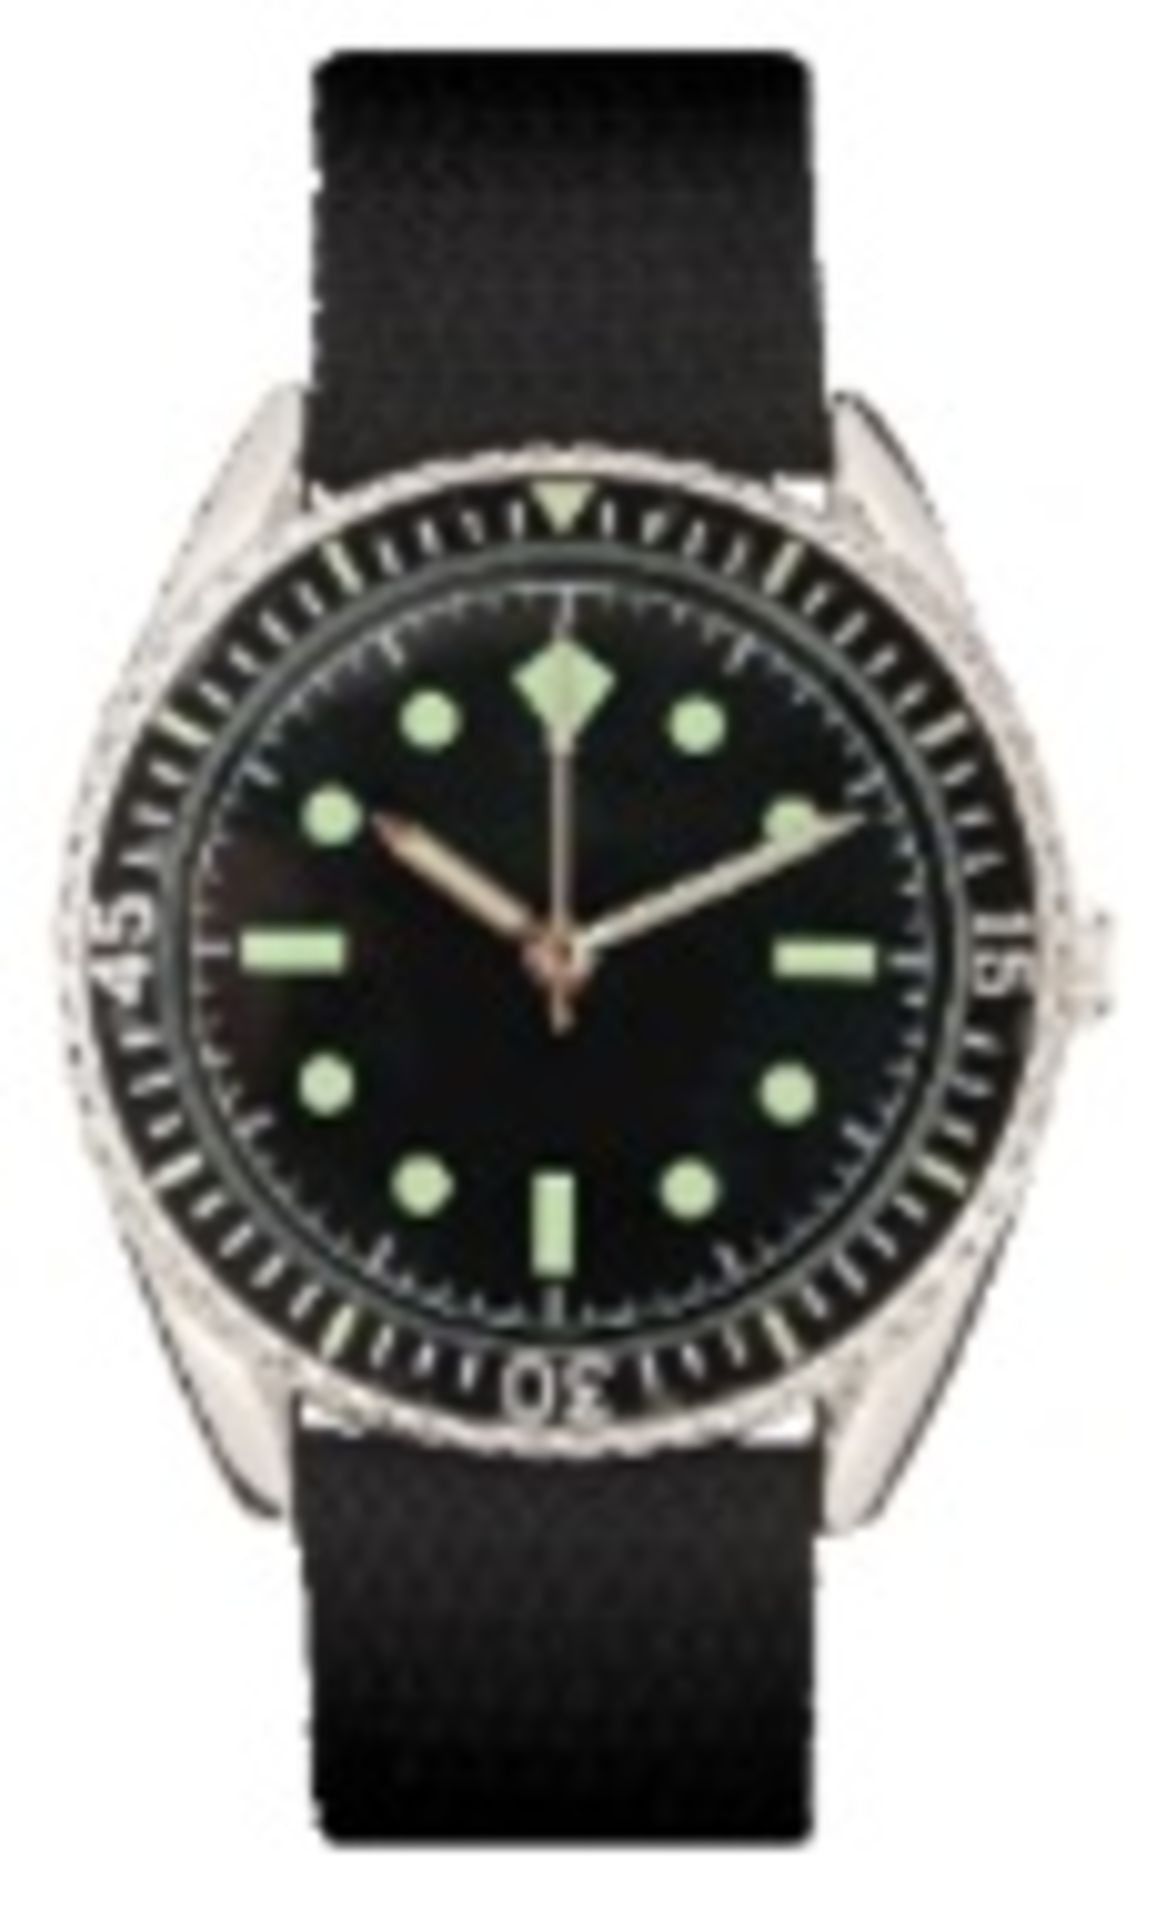 + VAT Brand New Gents 1960s German Naval Commando Watch with Engraved Back in Presentation Box - Image 2 of 2